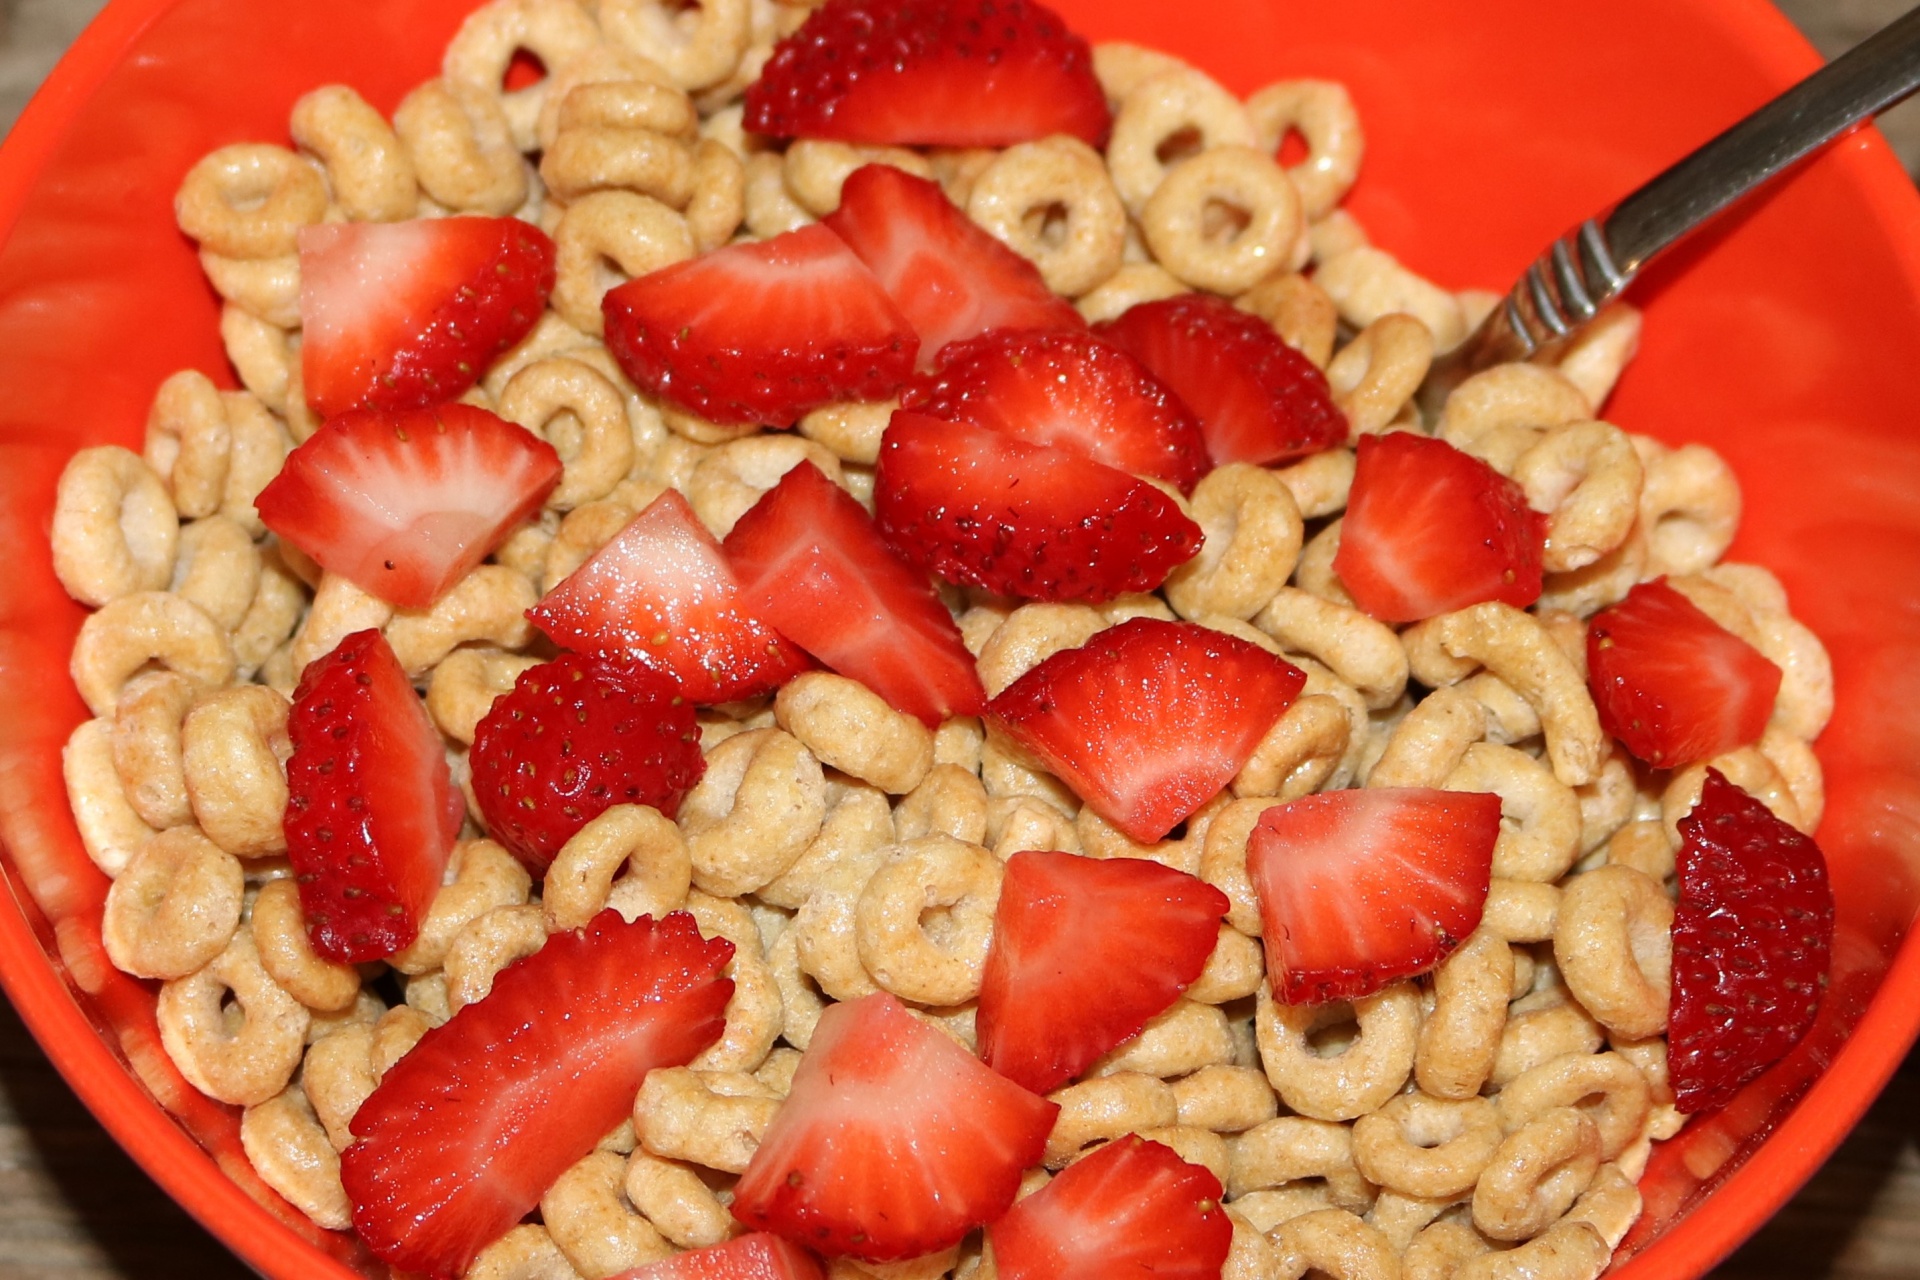 Close-up top view of a red bowl filled with oat cereal and sliced red strawberries.